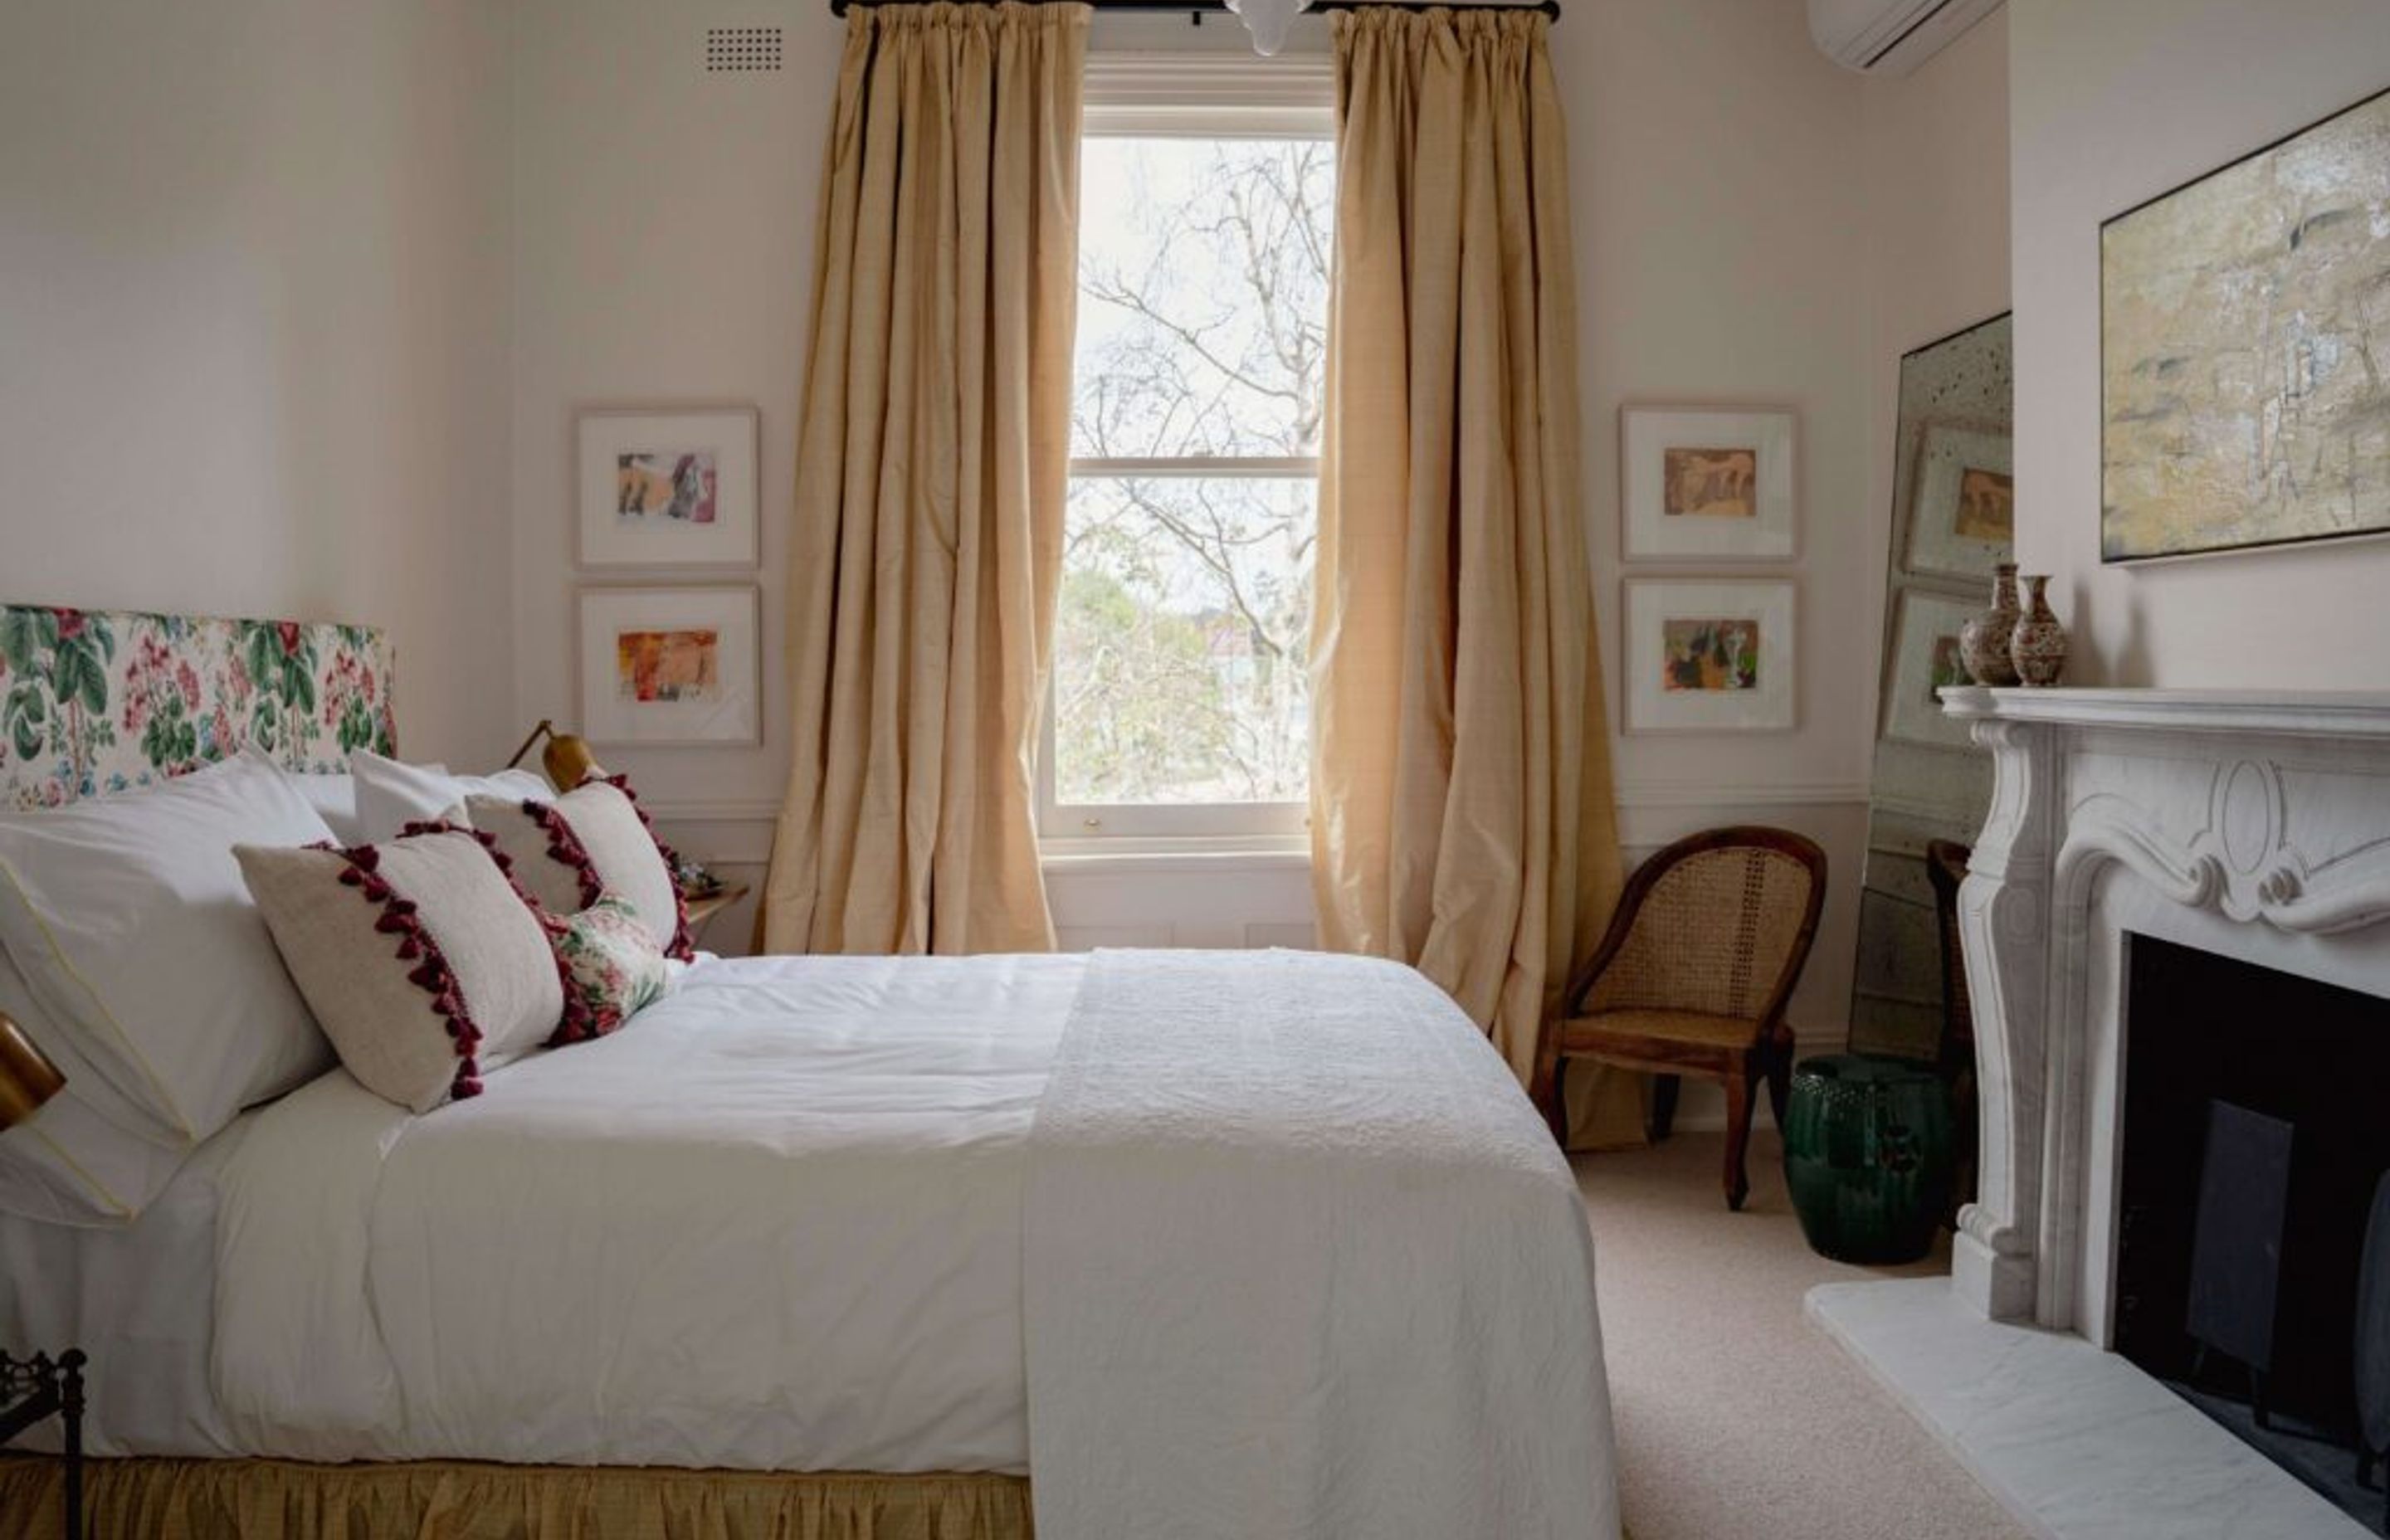 The relaxed Daisy suite has views out to the garden.